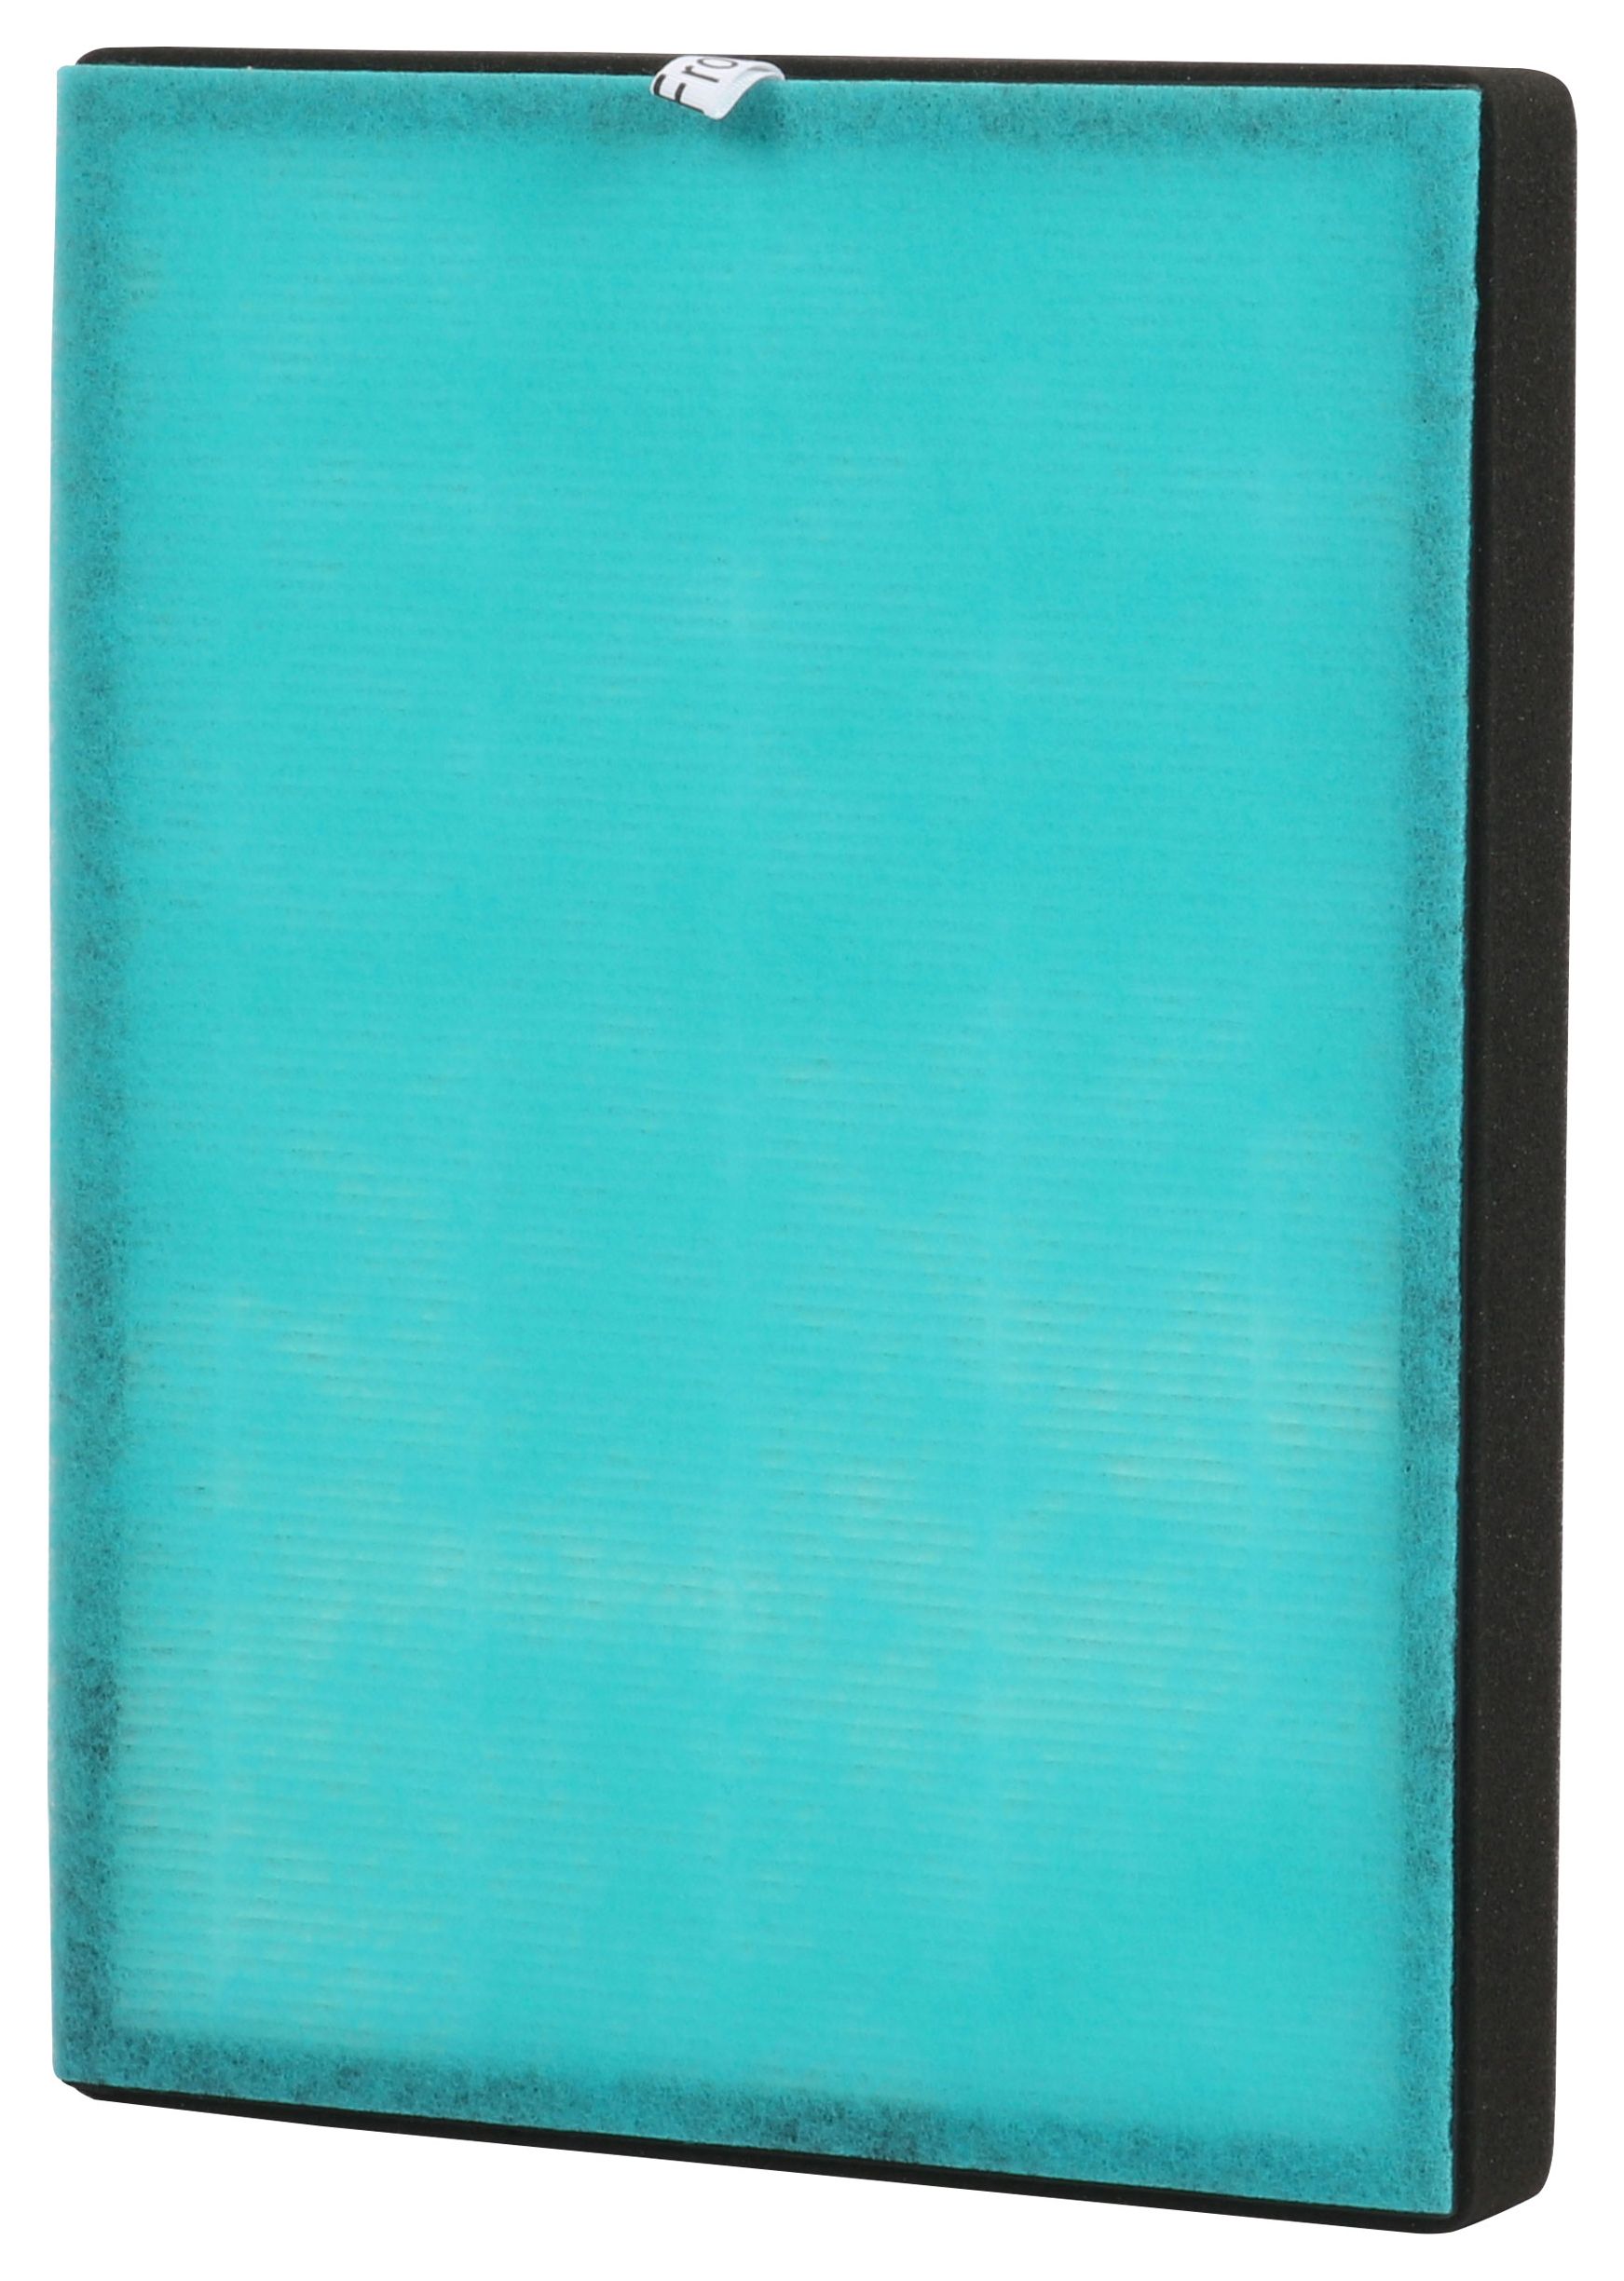 Image of PureAir Room Filter Advanced Air Purification